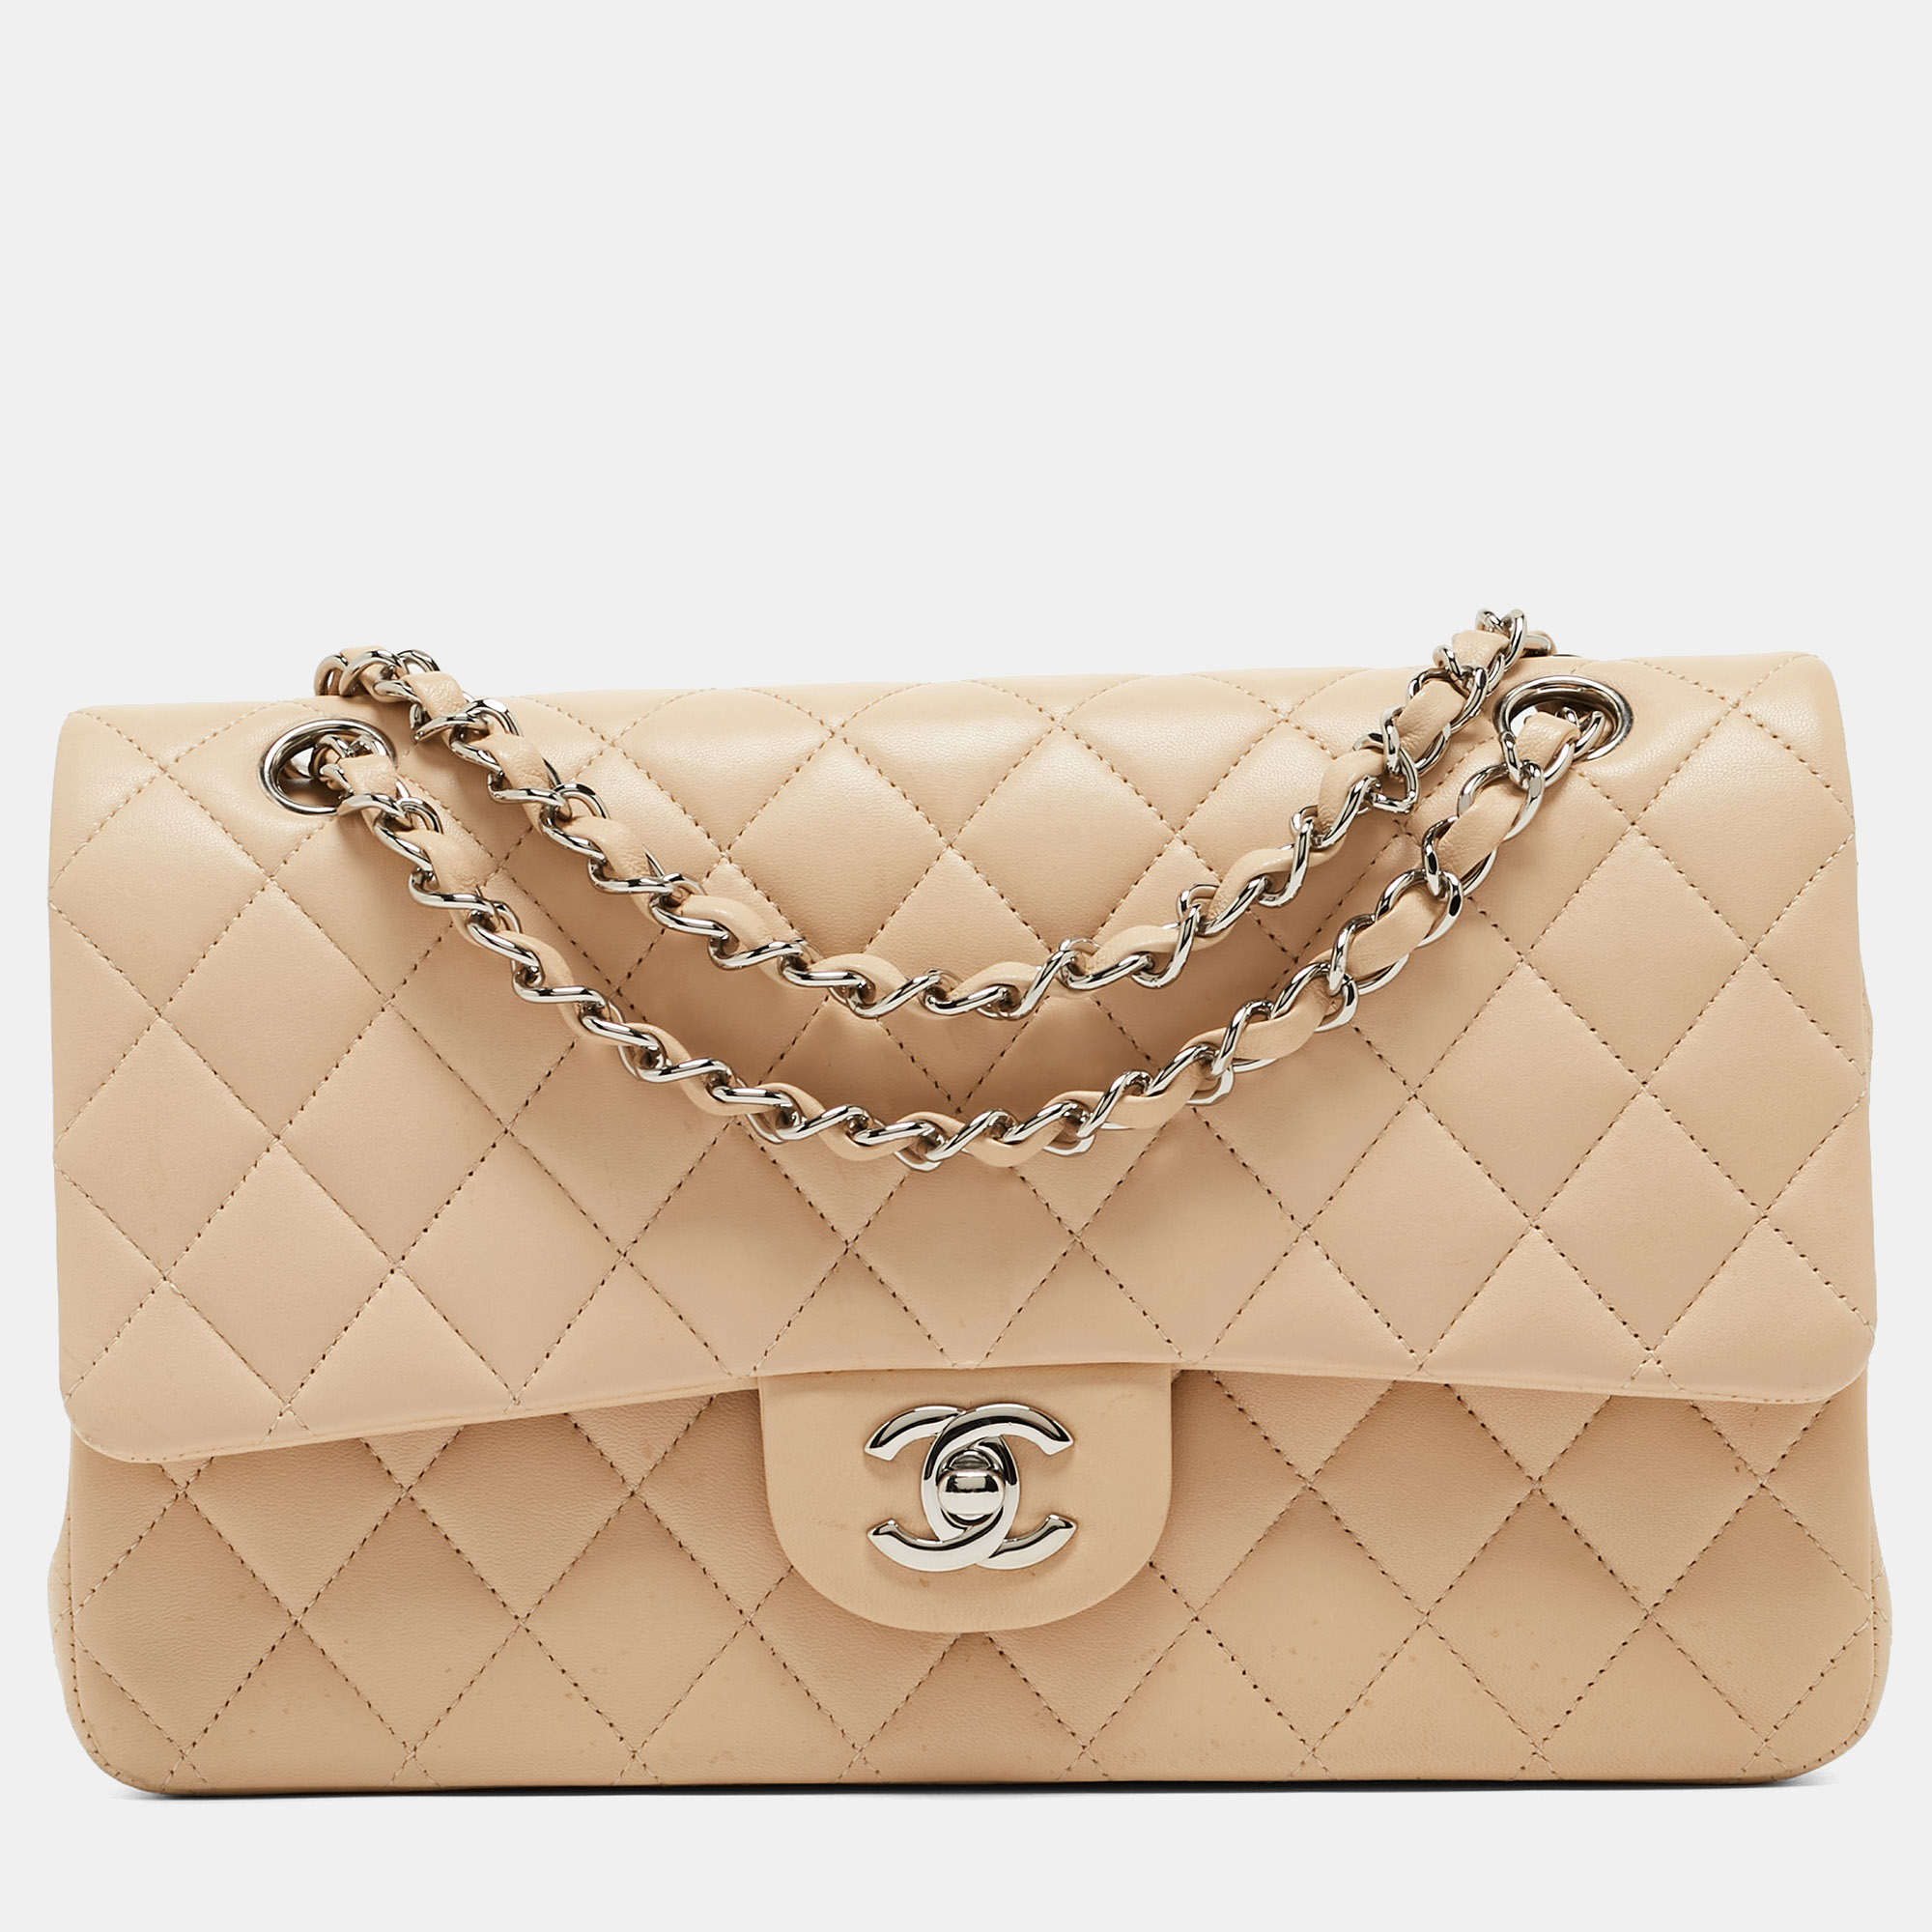 Pre-owned Chanel Beige Quilted Leather Medium Classic Double Flap Bag